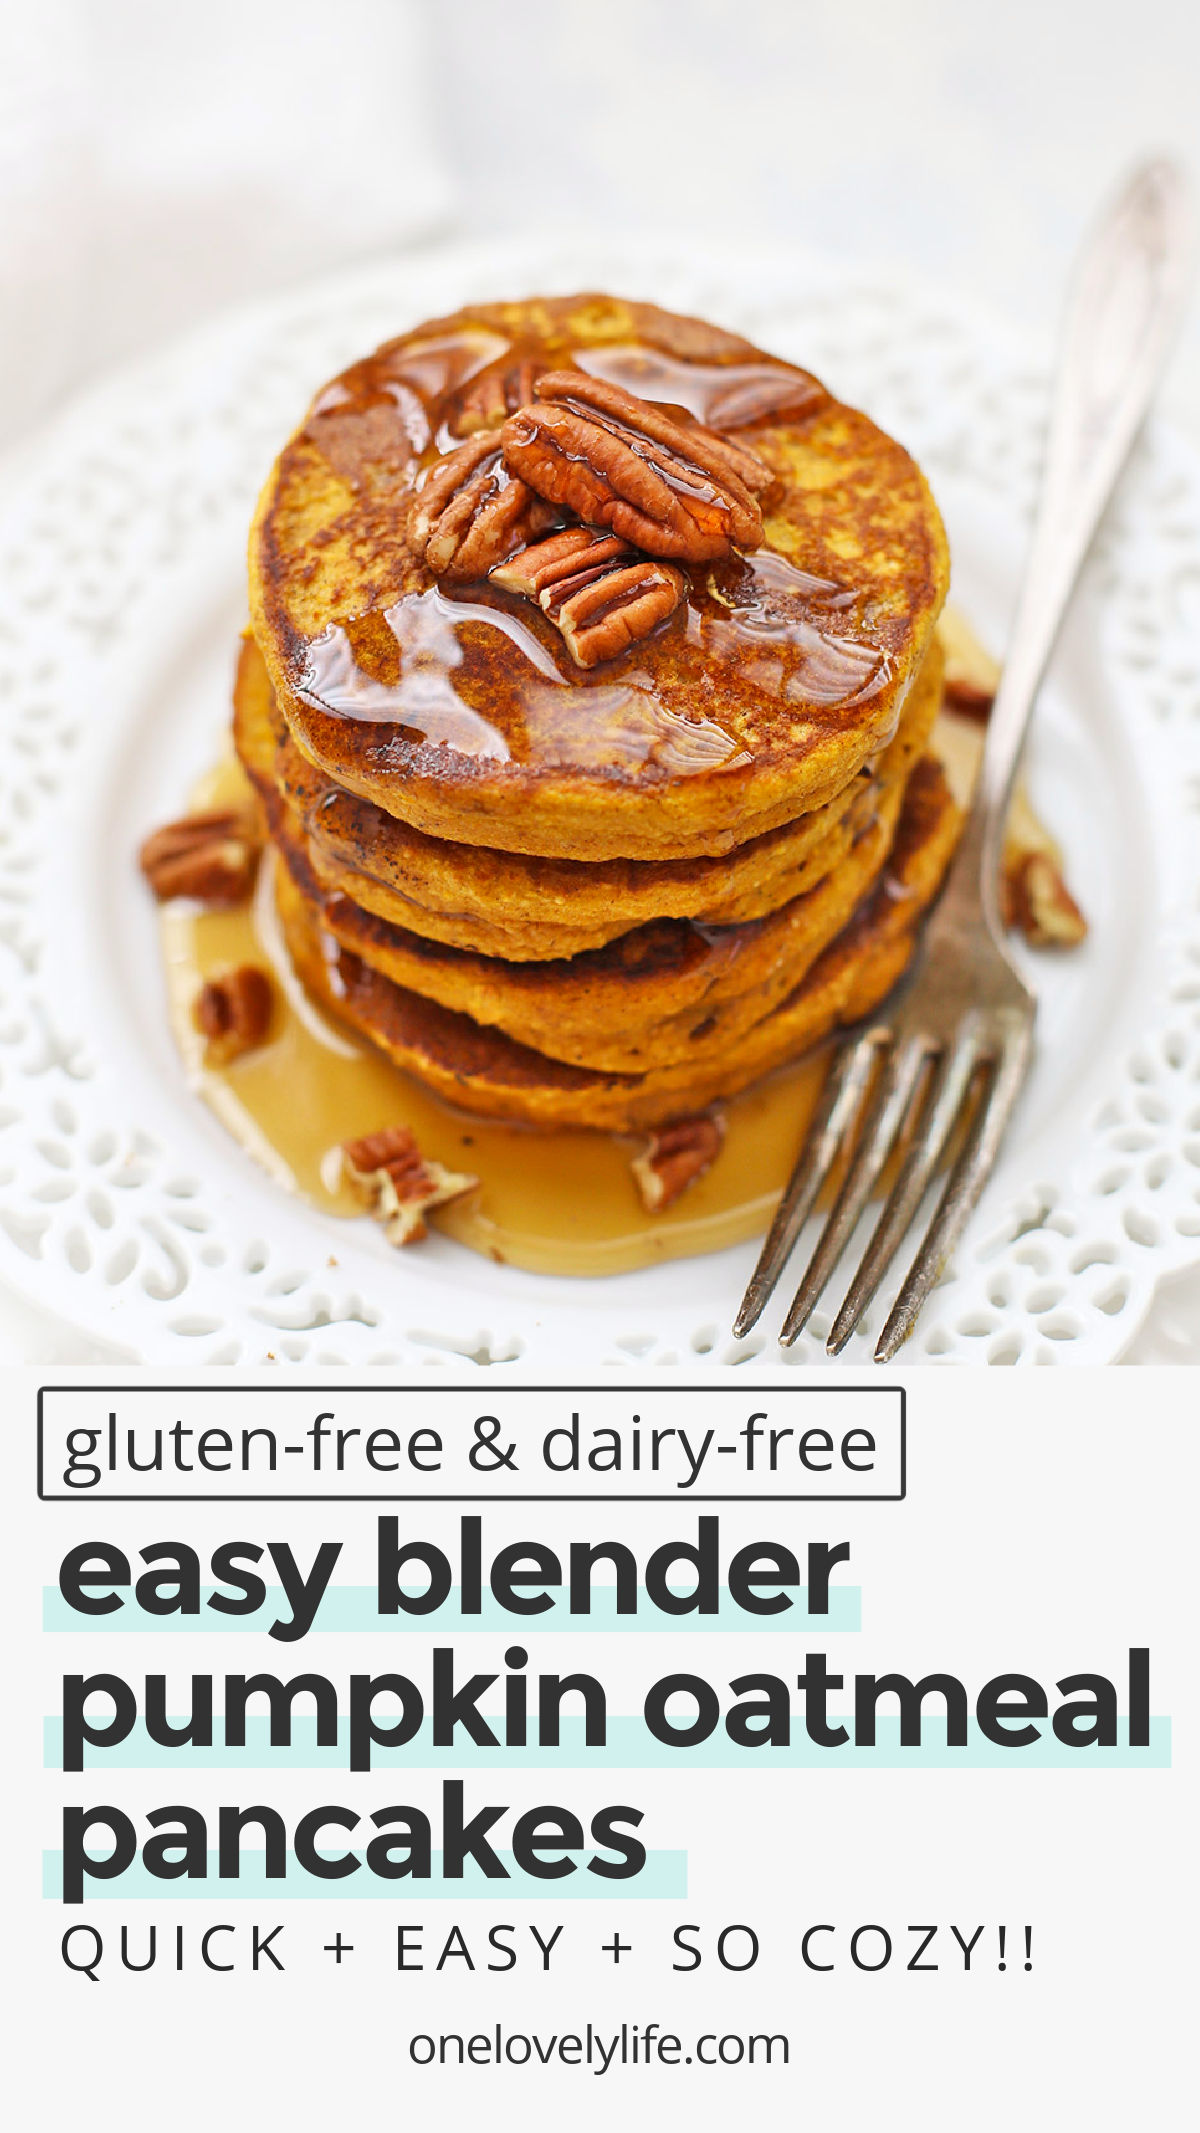 Blender Pumpkin Oatmeal Pancakes - These healthy pumpkin pancakes are gluten & dairy free. SO EASY, since they're made in the blender! It's the BEST pumpkin pancakes recipe! // blender pancakes // pumpkin pancakes // pumpkin oatmeal pancakes // gluten free pumpkin pancakes // pumpkin oat pancakes // blender pancakes recipe // blender pumpkin oatmeal pancakes // healthy pumpkin oatmeal pancakes // gluten free pumpkin oatmeal pancakes